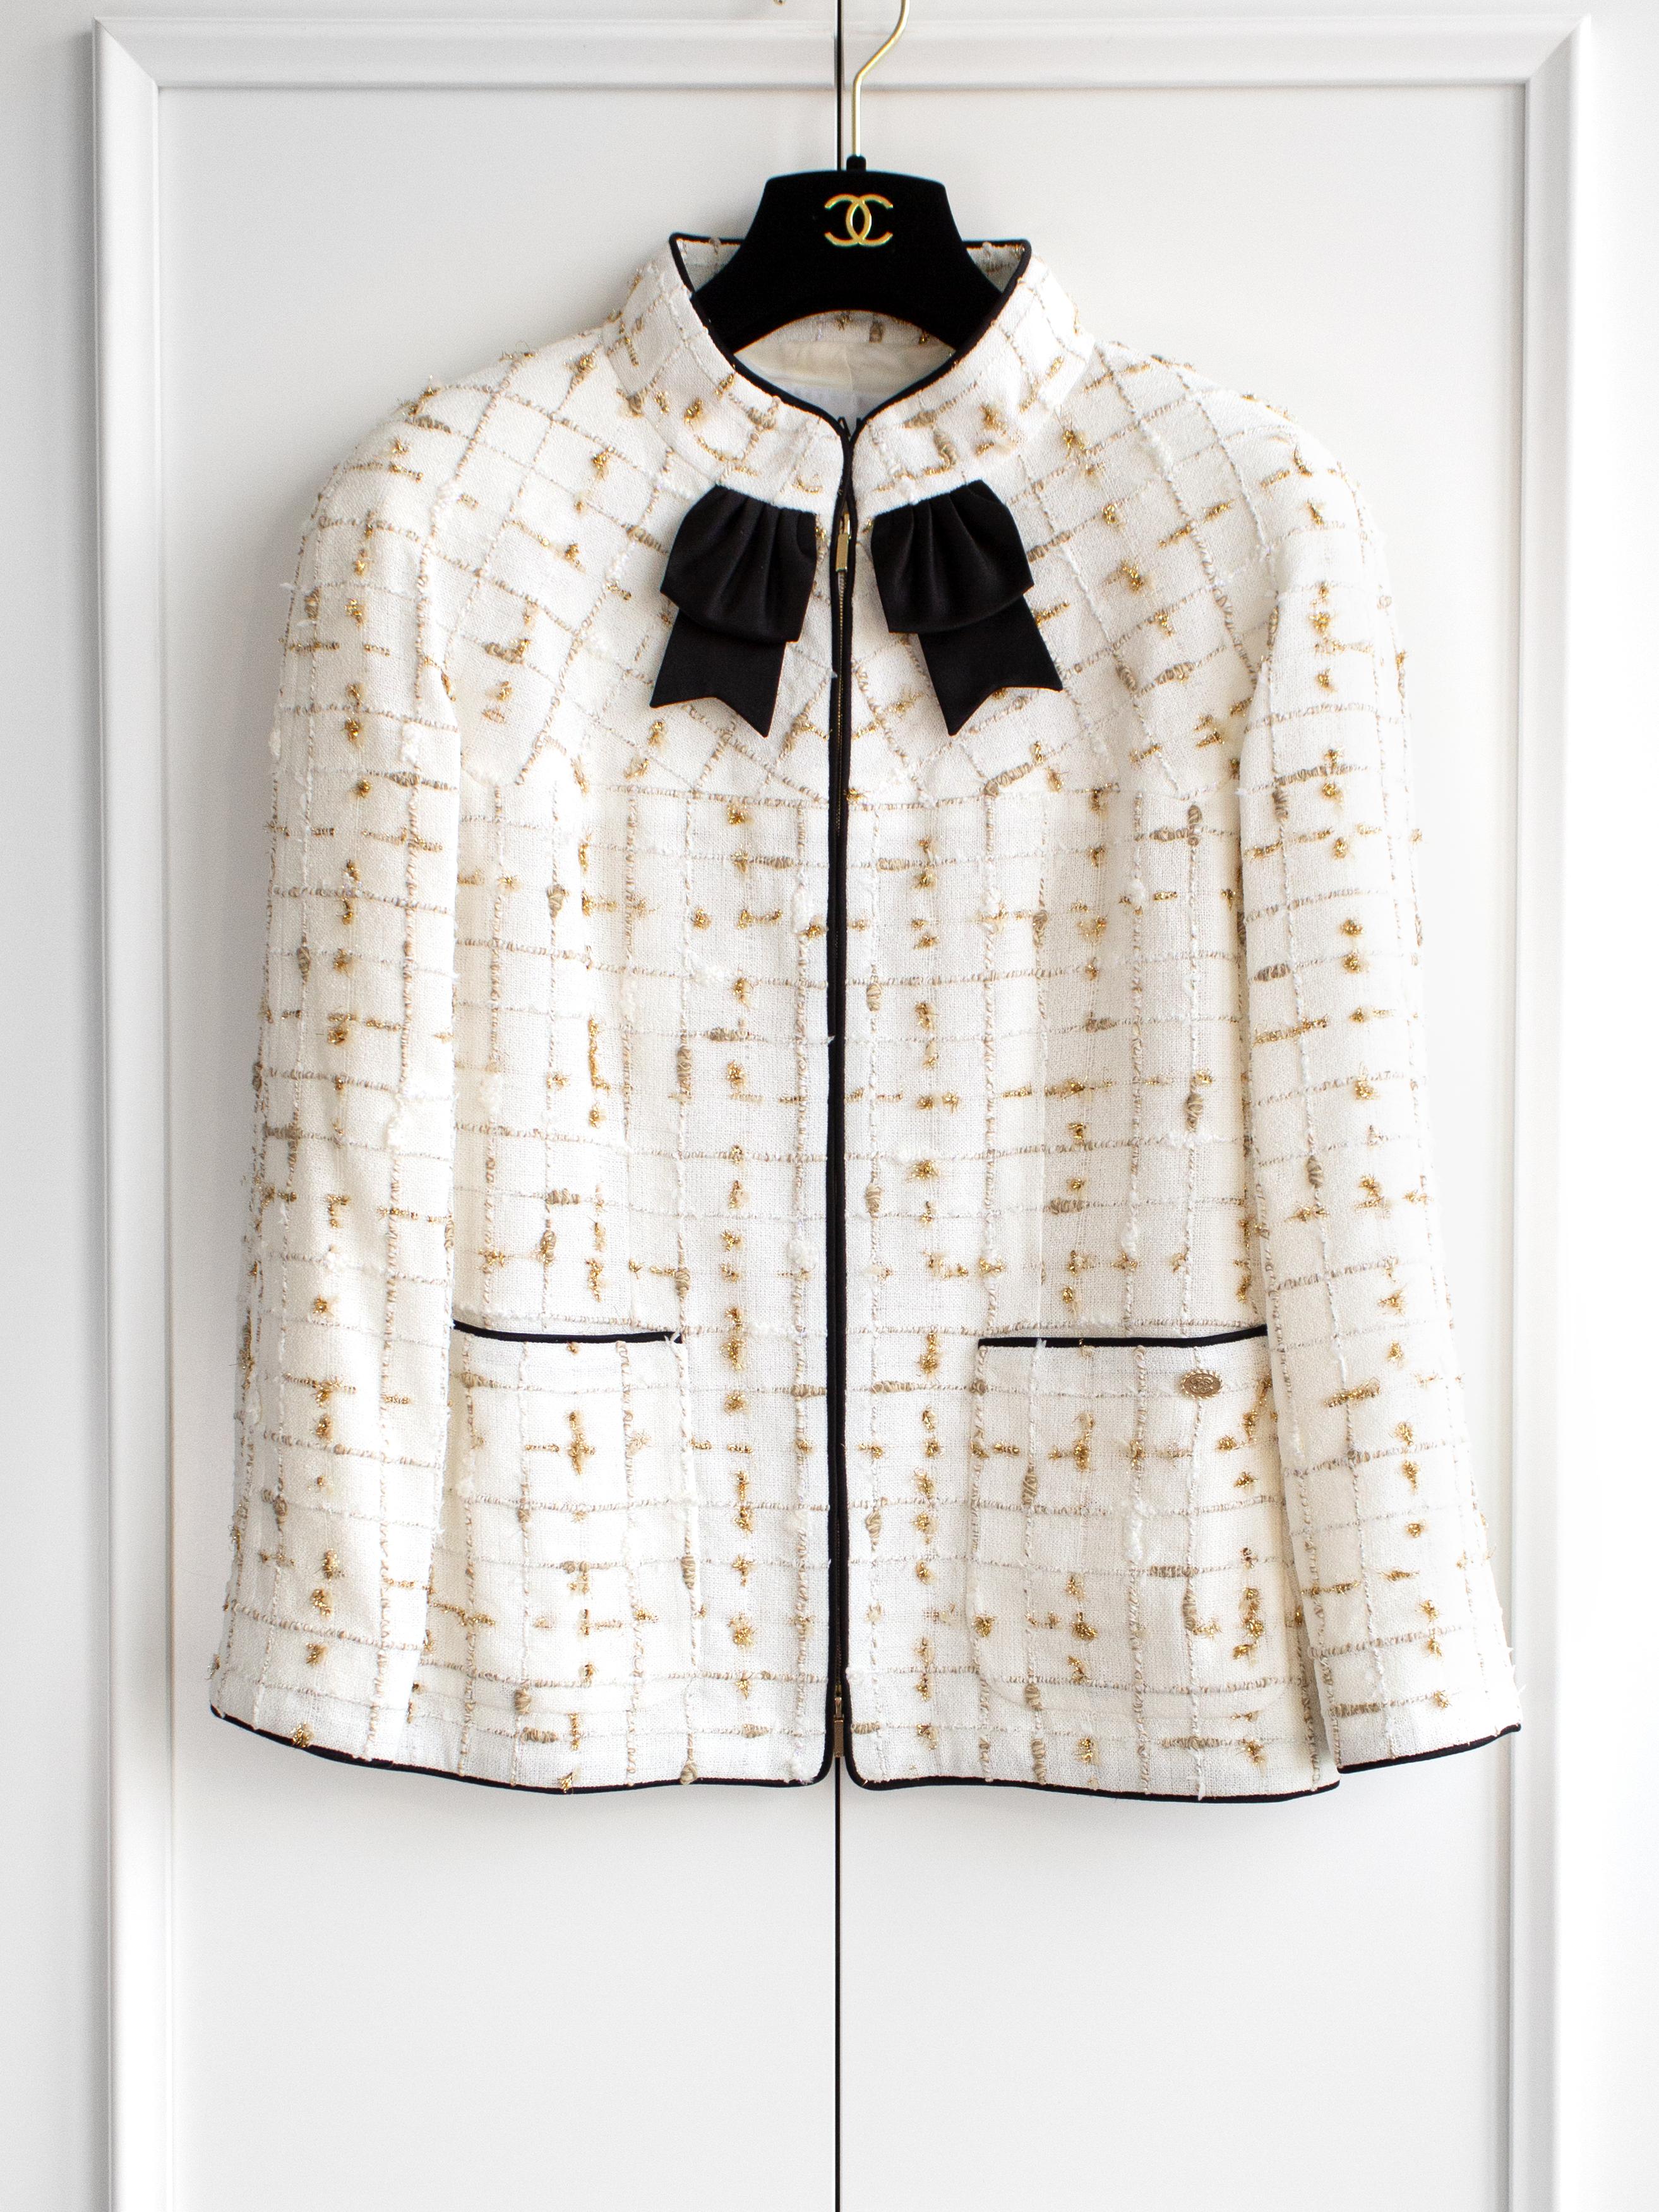 Chanel S/S 2019 By The Sea White Gold Black Bow Embellished 19P 19S Jacket  In Excellent Condition For Sale In Jersey City, NJ